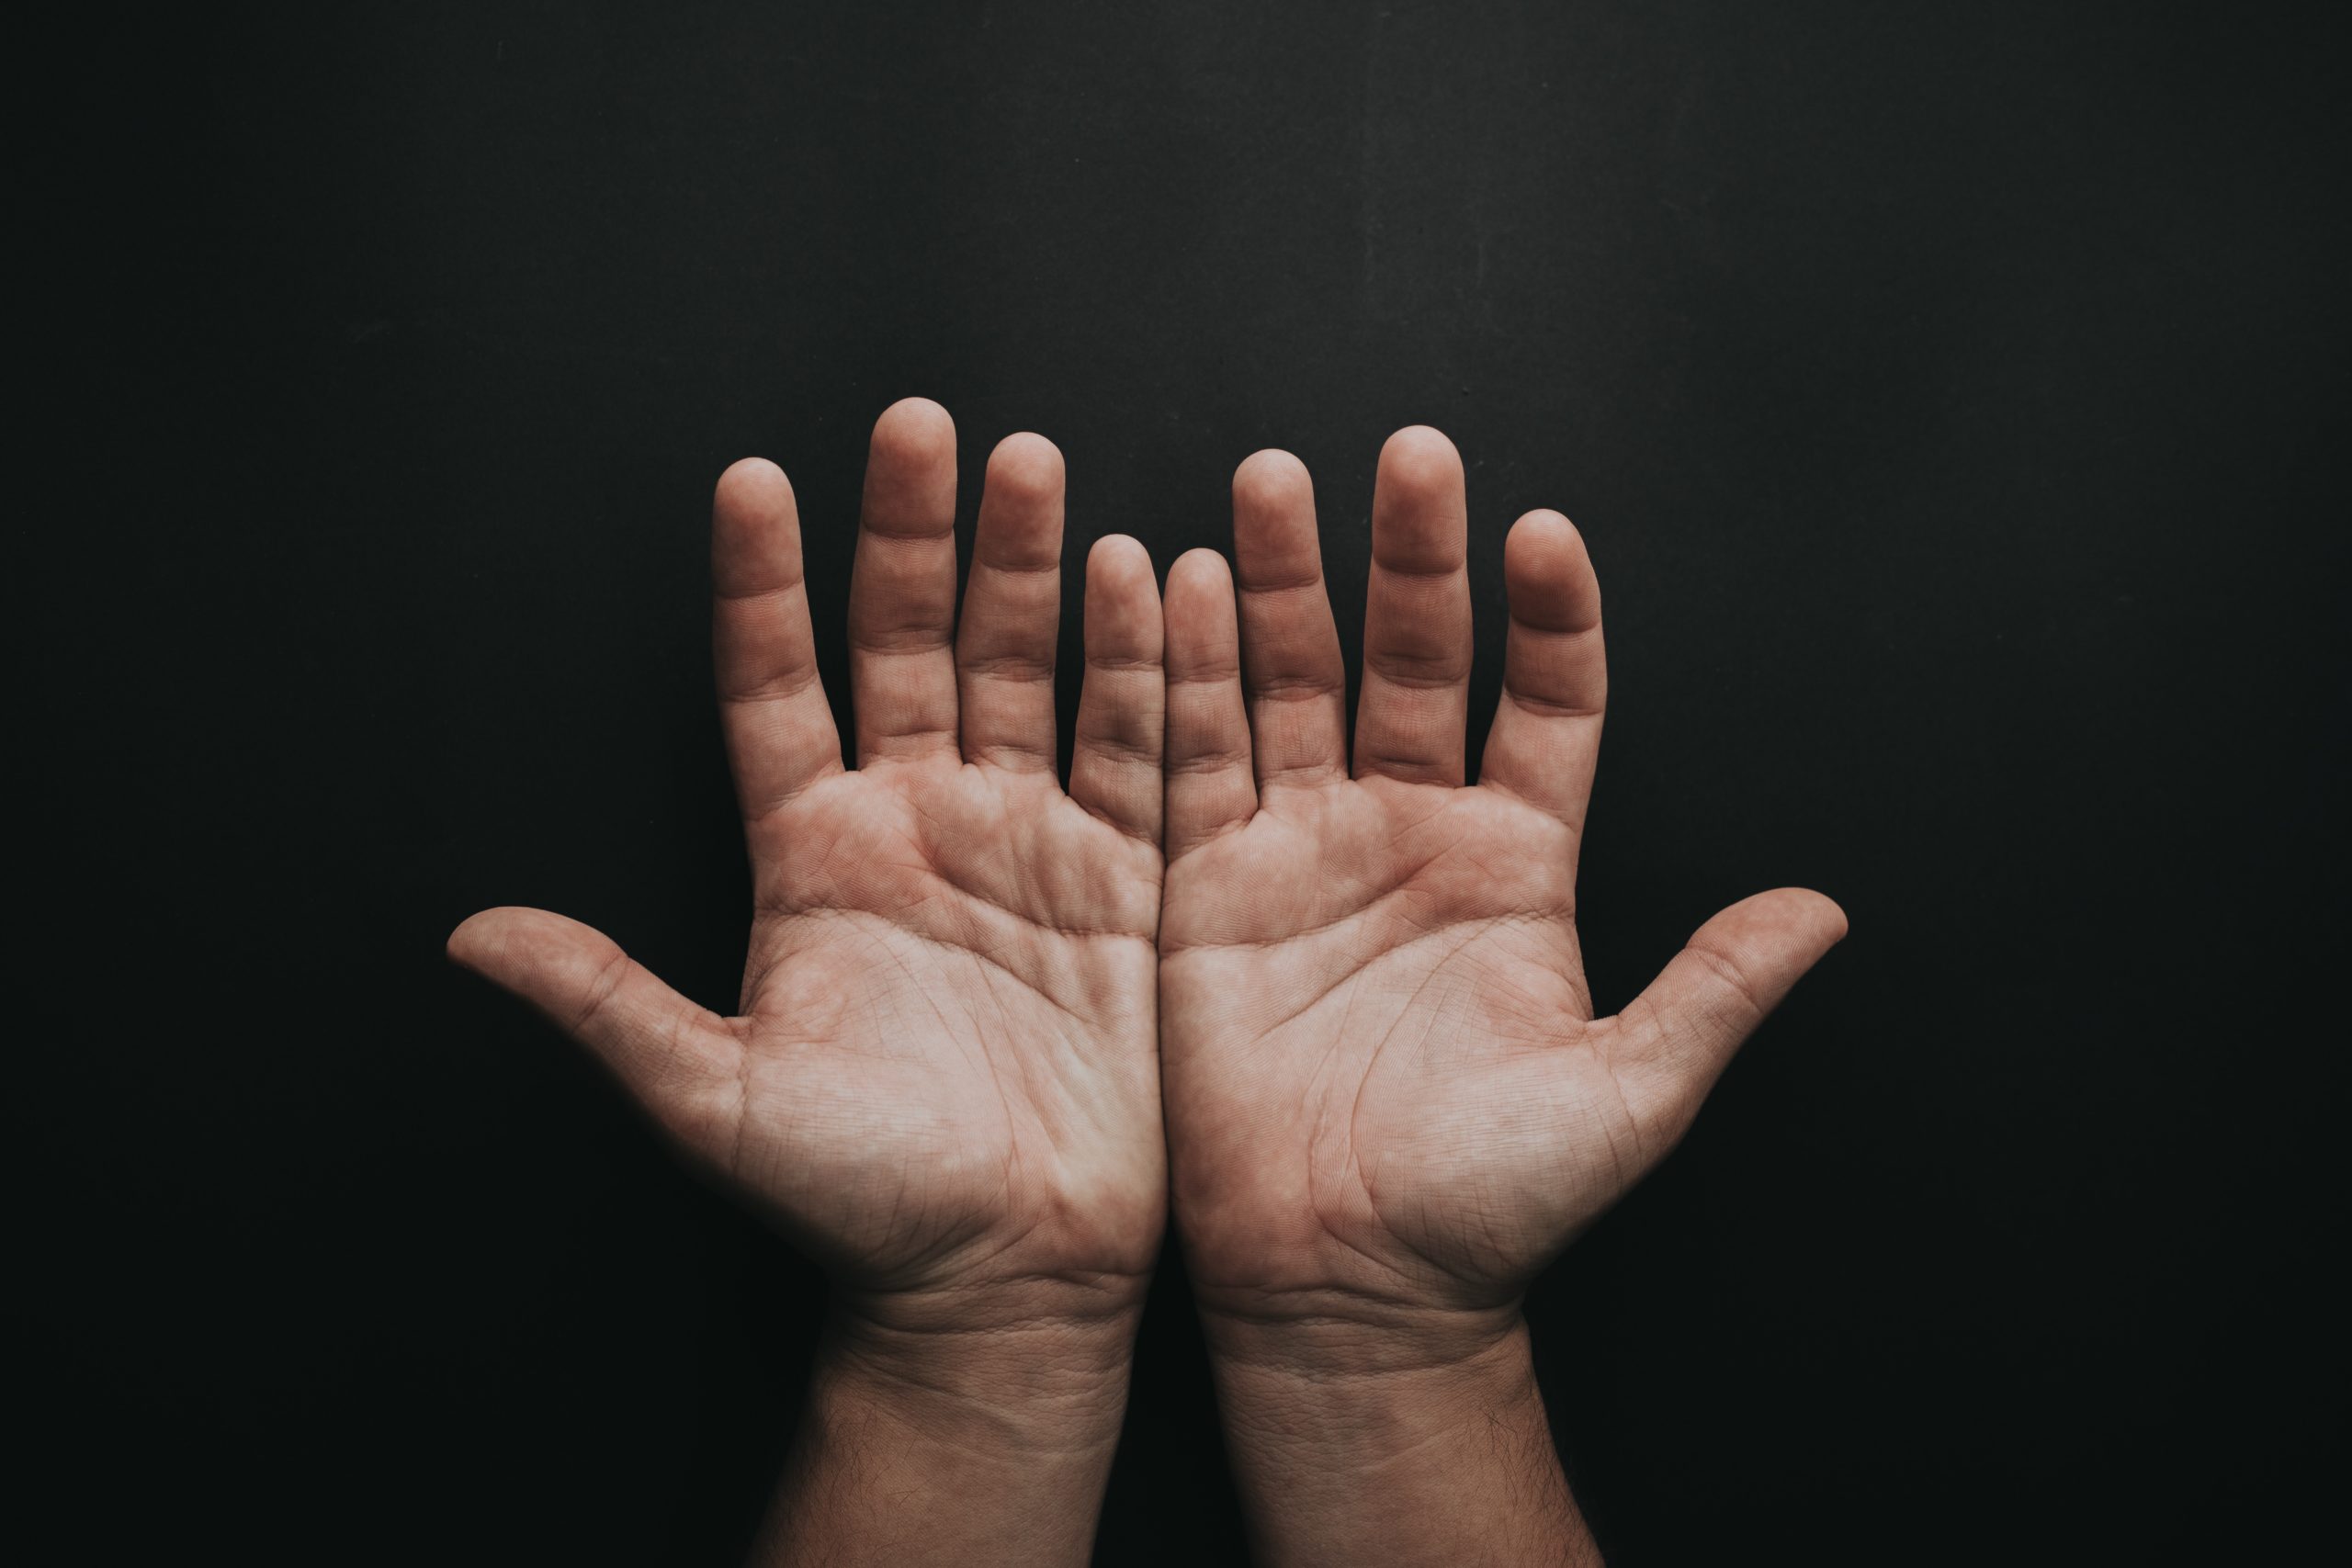 clean white males hands on a dark background with palms facing up